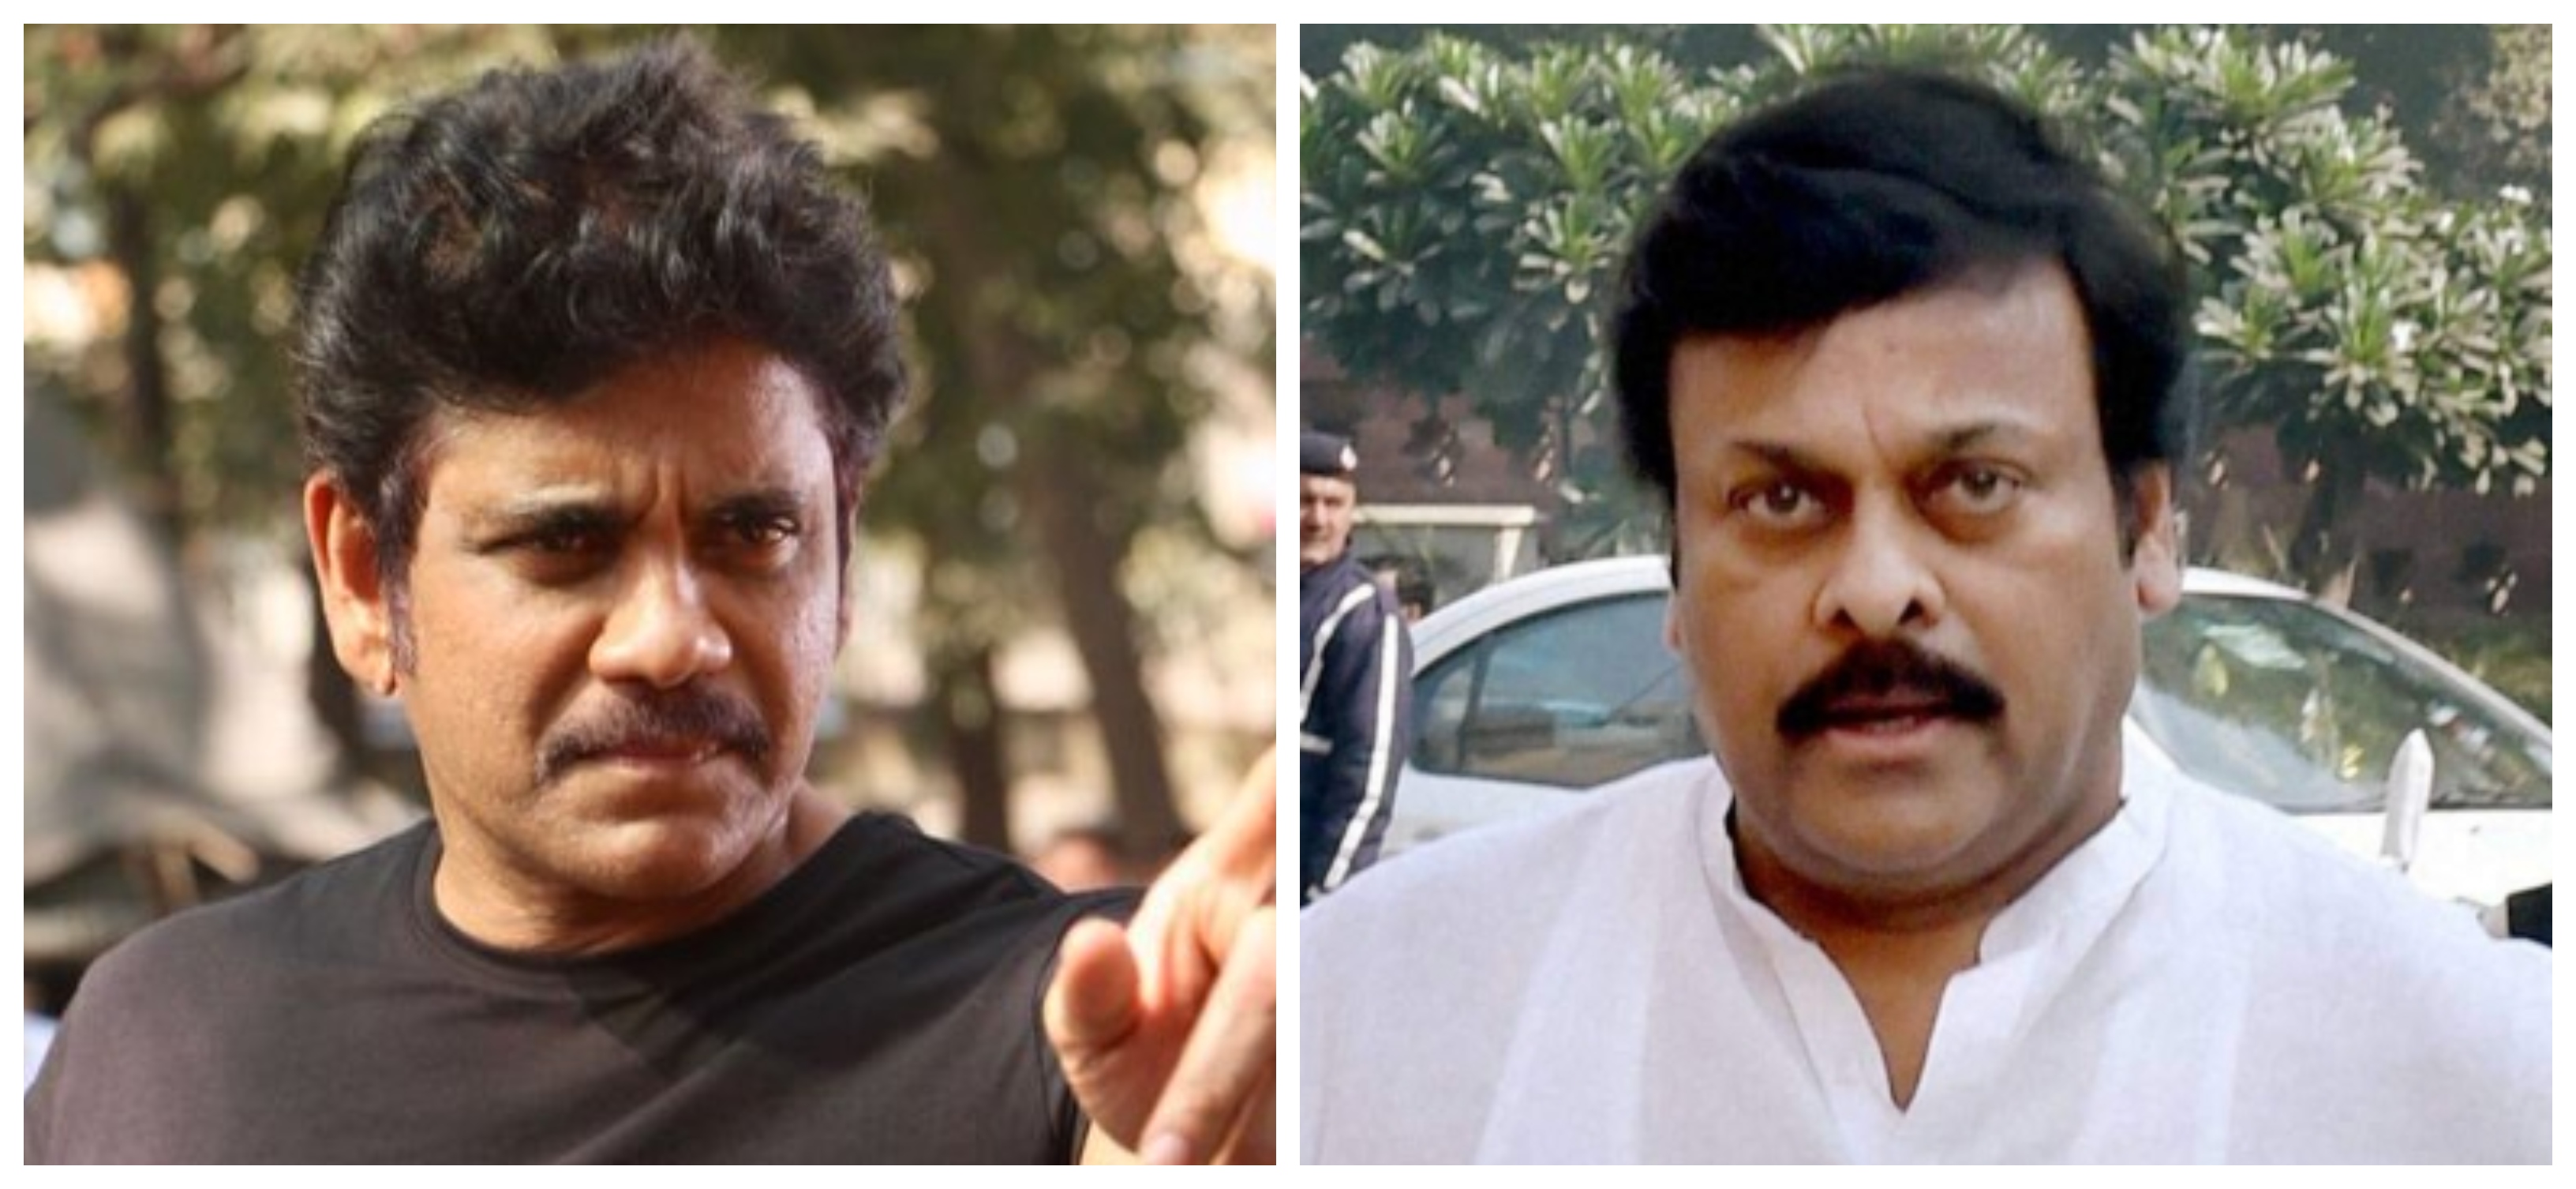 Nagarjuna, Chiranjeevi, face recognition, Hyderabad airport, The Federal, English news website, The Federal, English news website